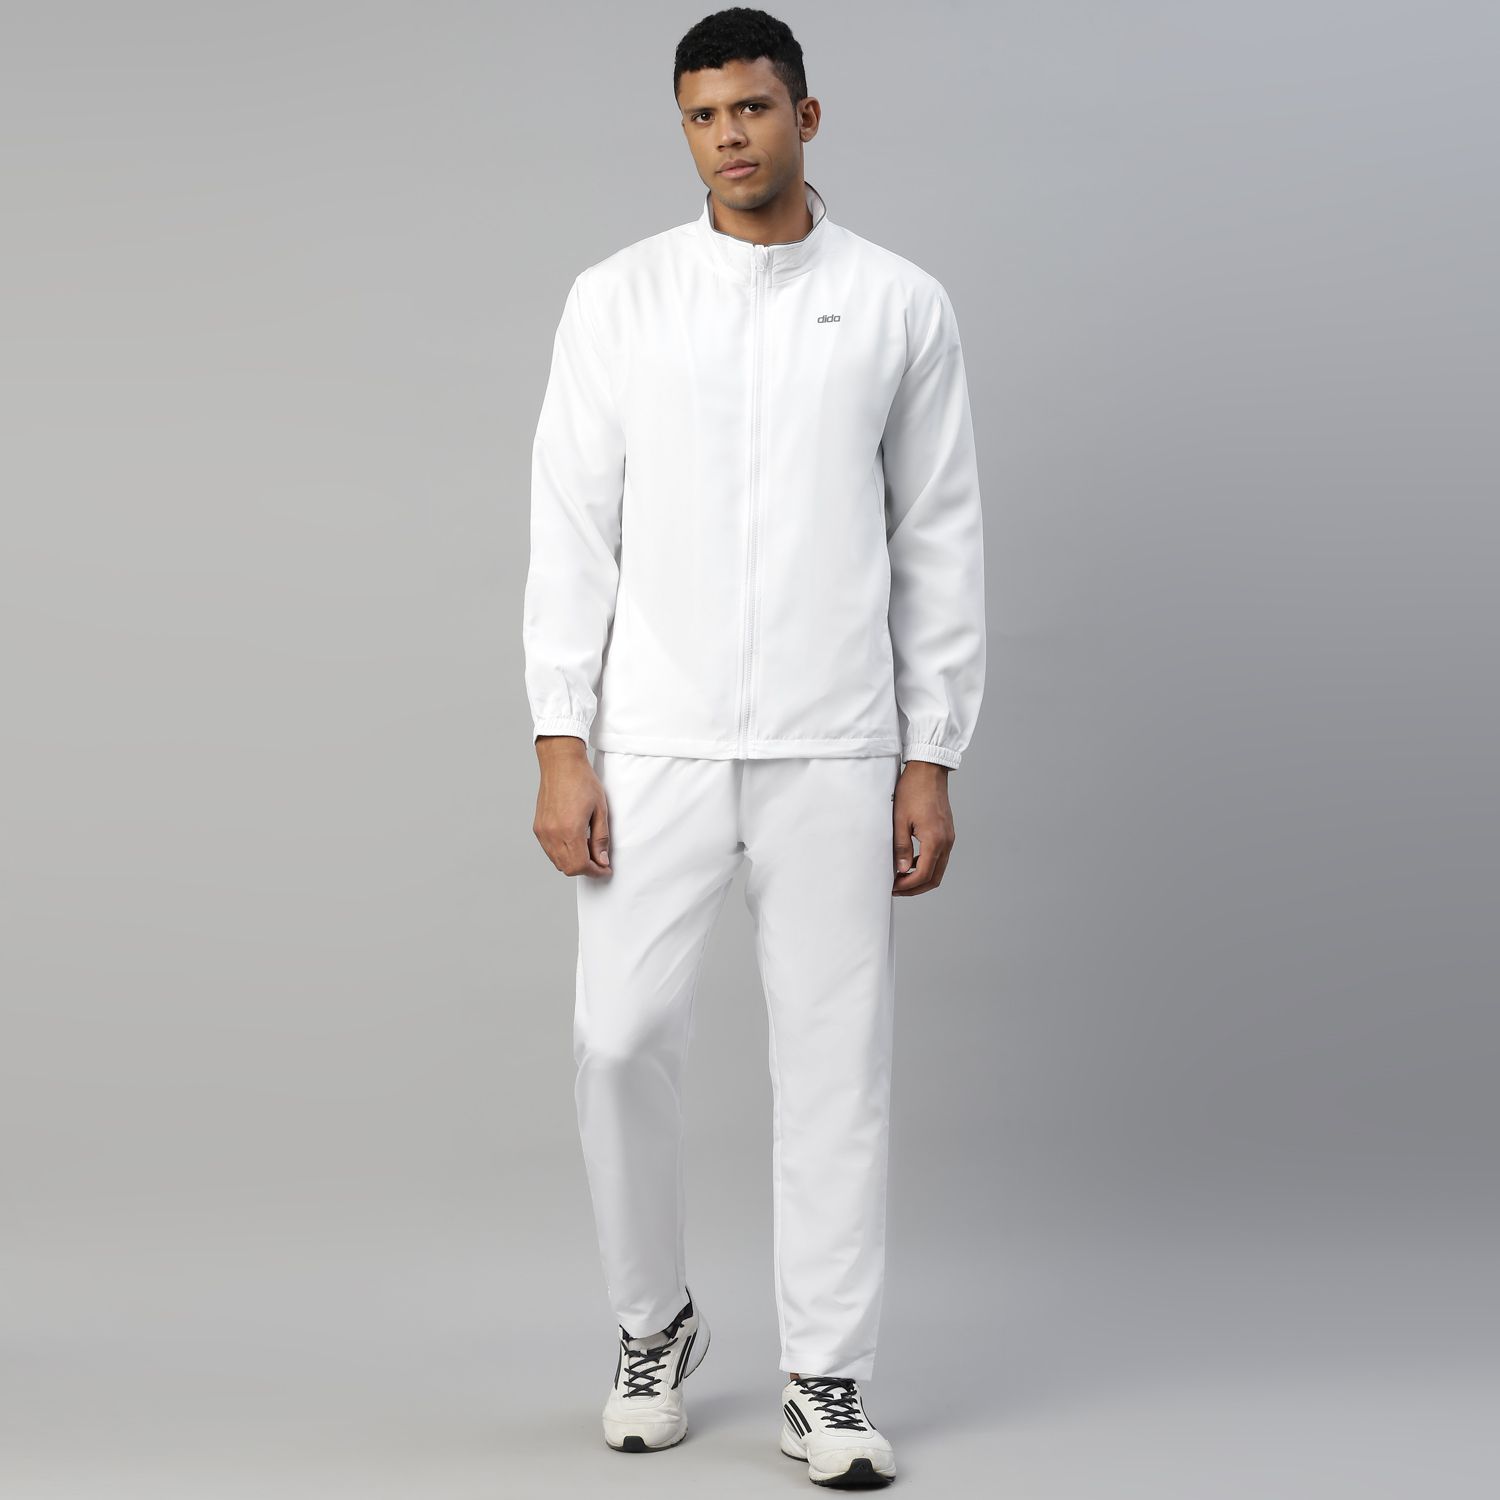     			Dida Sportswear White Polyester Regular Fit Solid Men's Sports Tracksuit ( Pack of 1 )